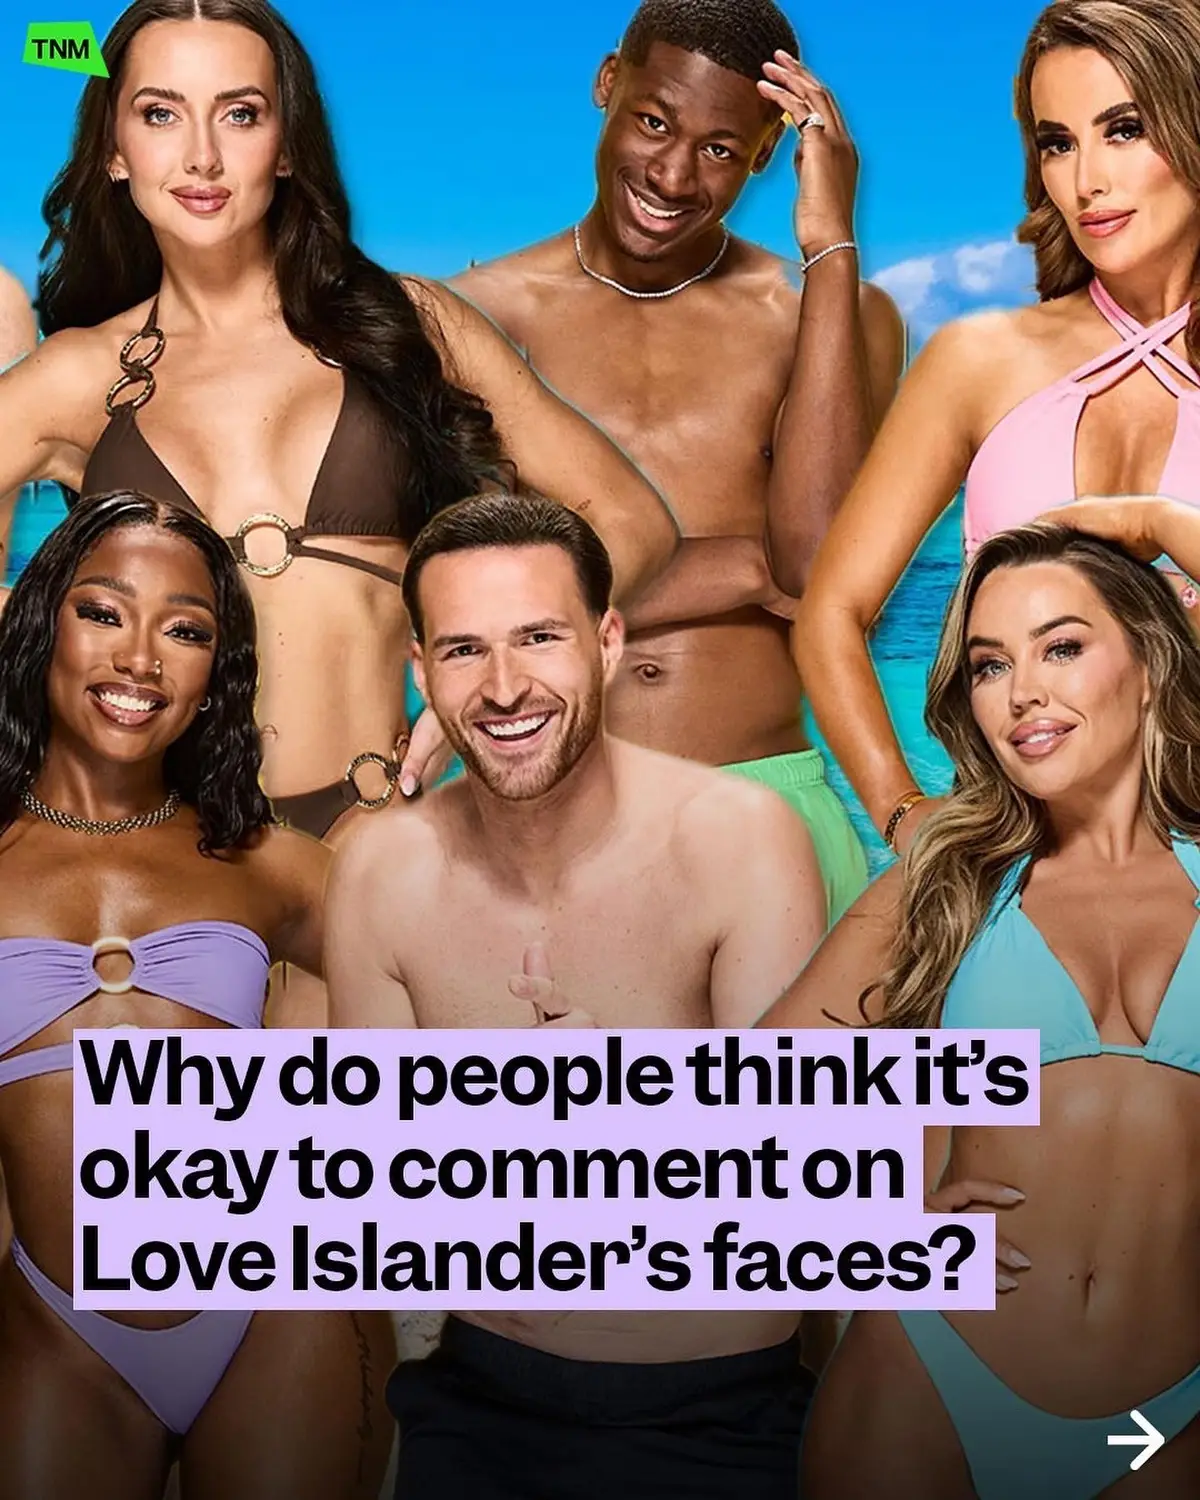 We love Love Island, but we couldn’t help notice all of the online chat about the girls' faces and accusations of them having “too much filler”.  Ex-Love Islanders Faye Winter and Molly-Mae Hague have spoken before about the way online trolling and speculation made them feel. So, how about we all have a kind girl summer and stop talking about the way other people look. Because at the end of the day, who really cares. ❤️🏝️ #LoveIsland #Love #island #botox #filler #online #fayewinter #mollymae #mollymaehague